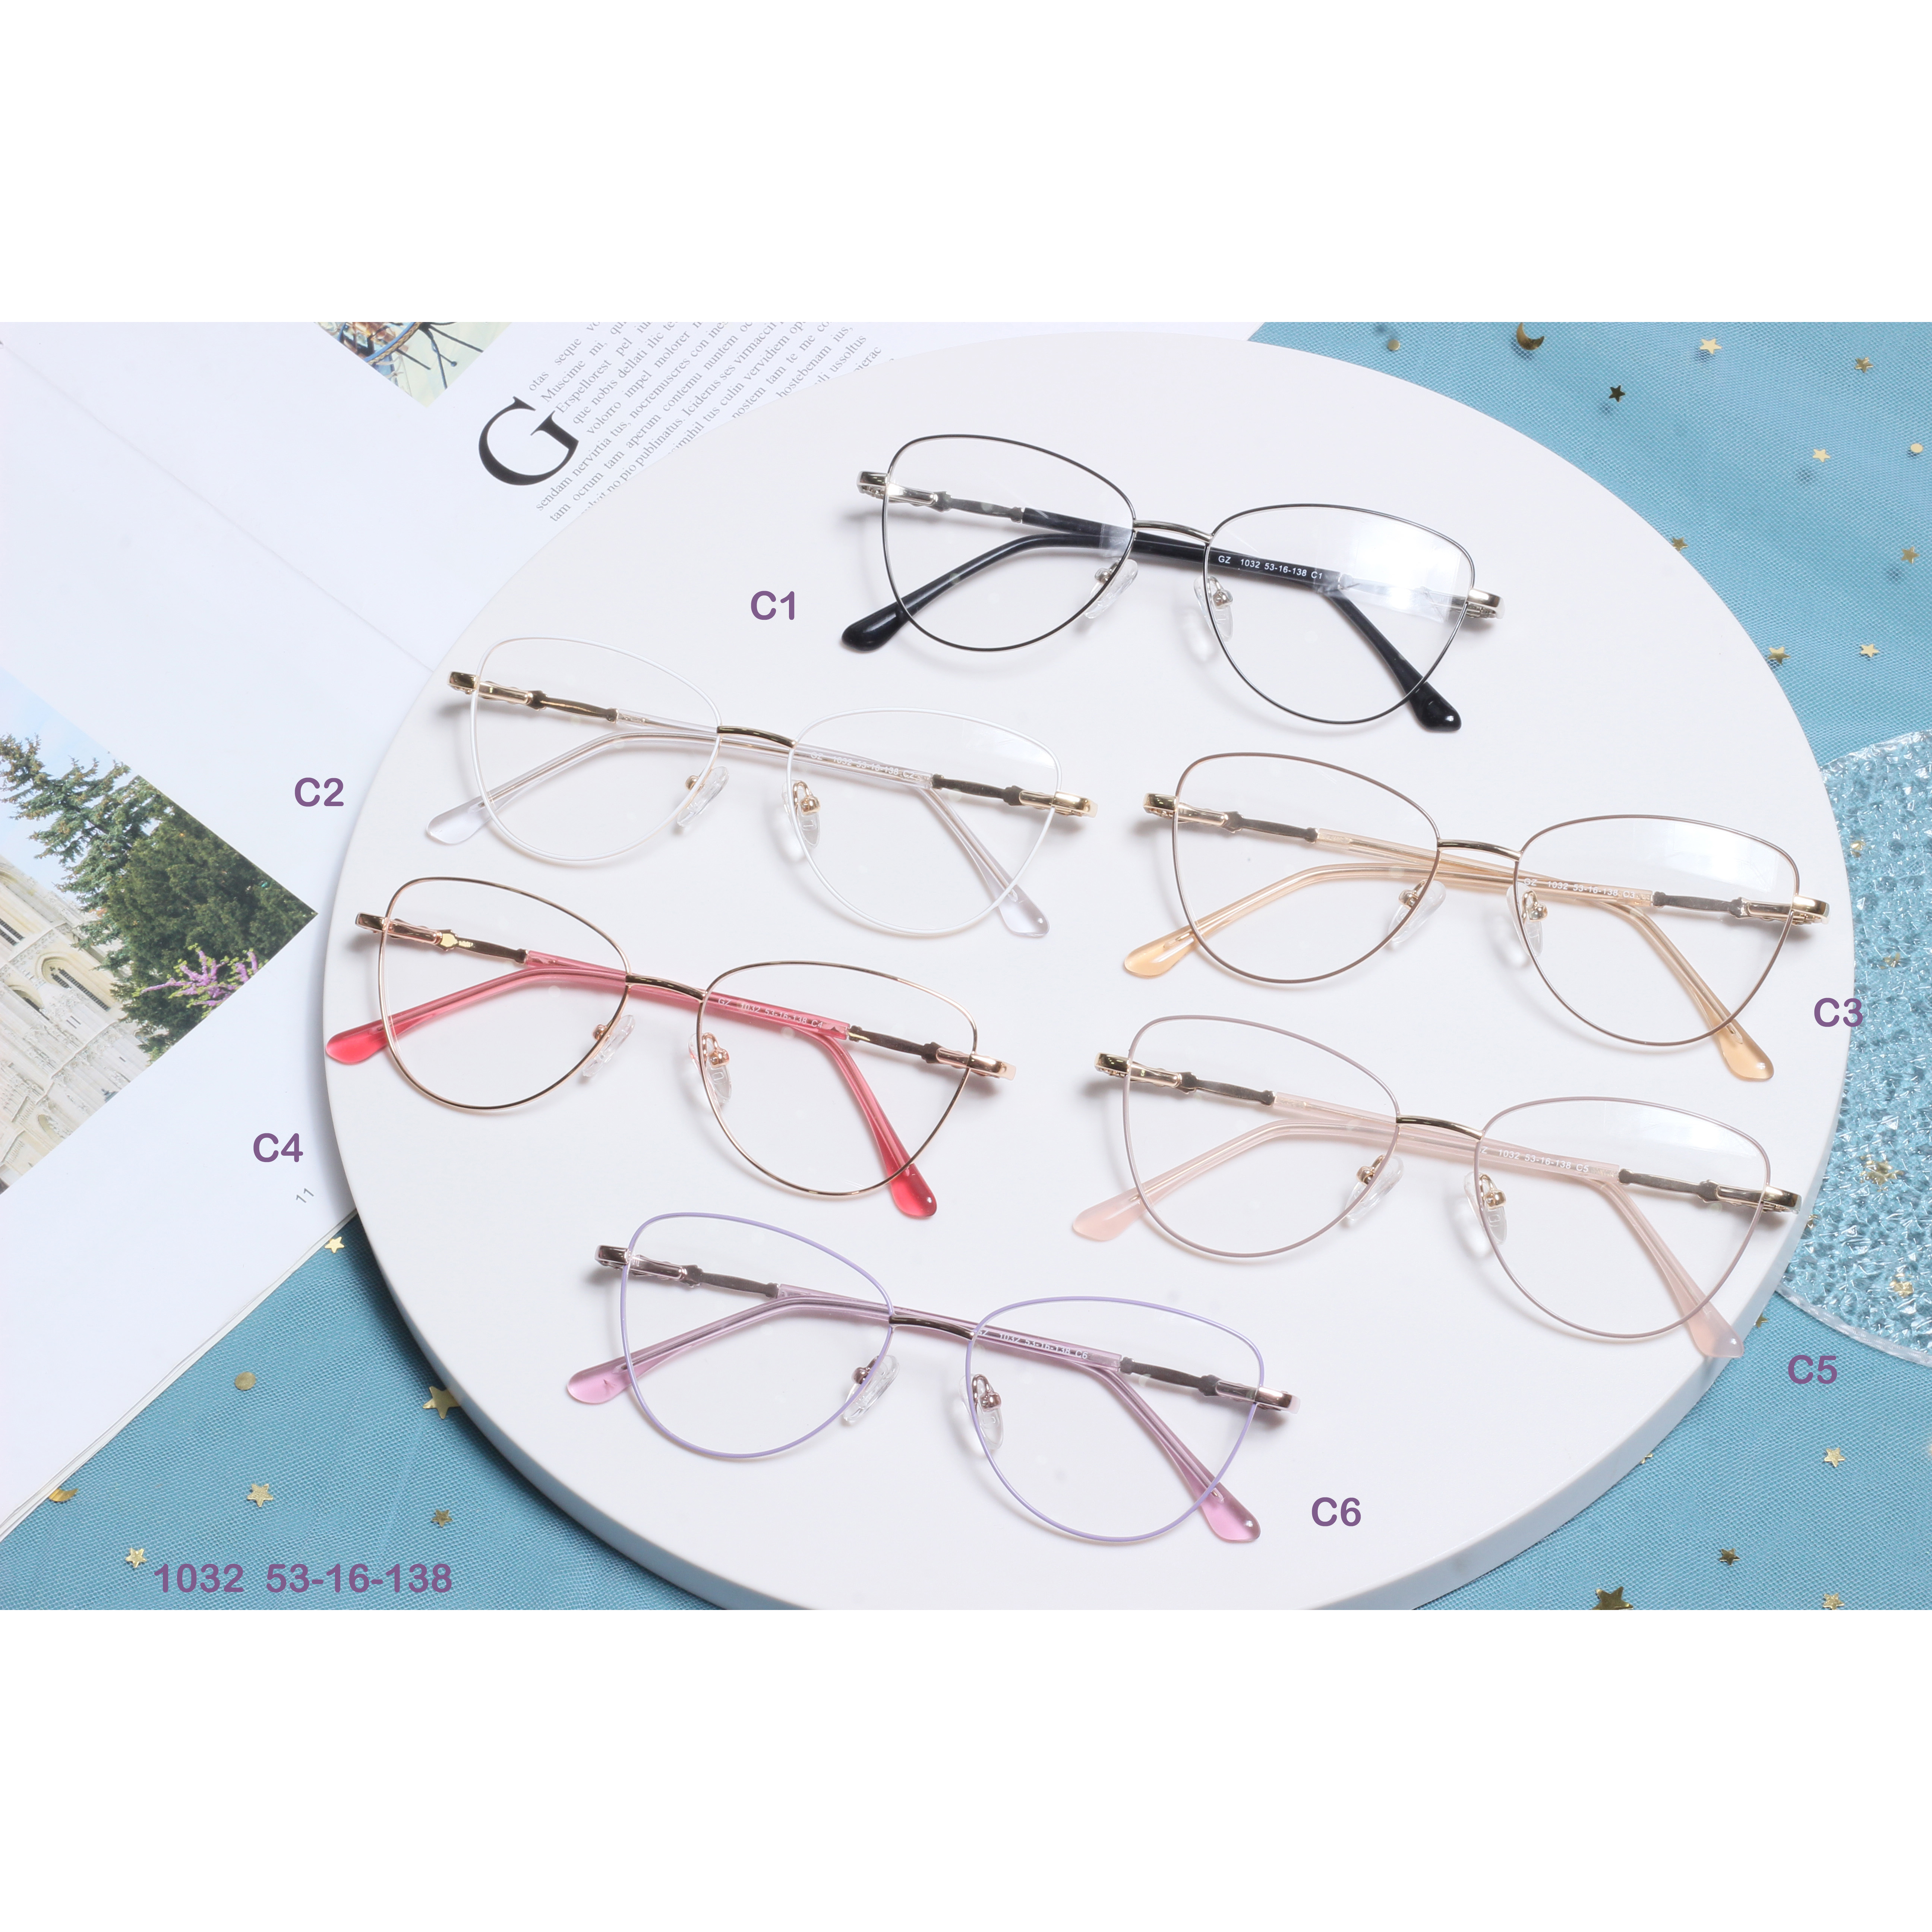 Eyeglasses Business Optical spectacle Frames In Stock (2)